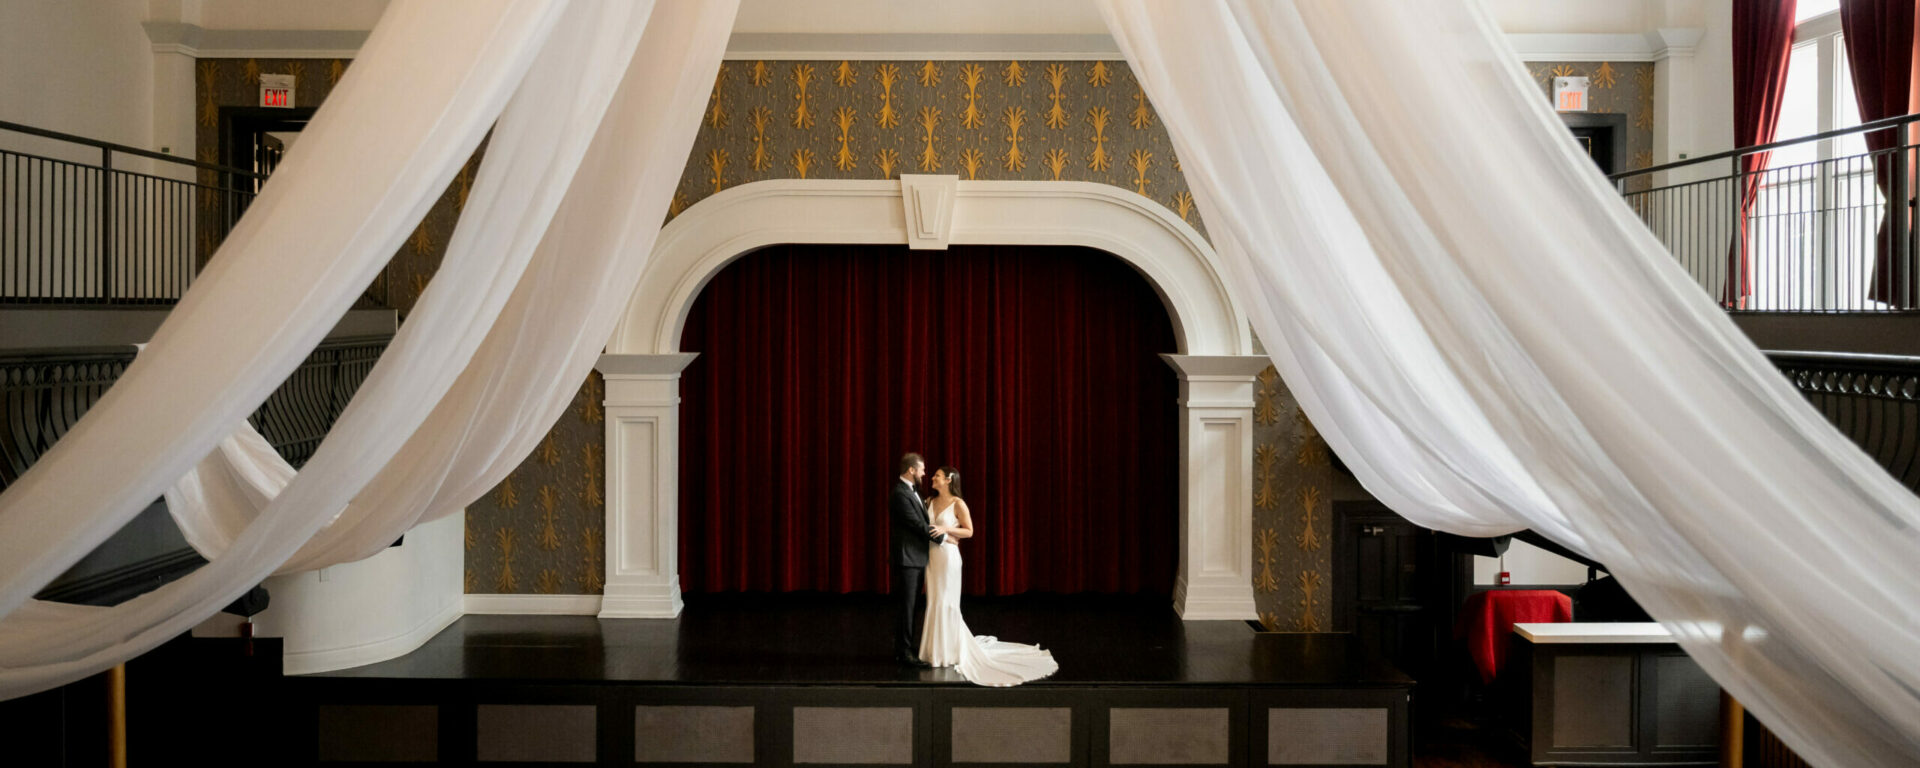 Food Stories-The Great Hall Wedding-Header 2